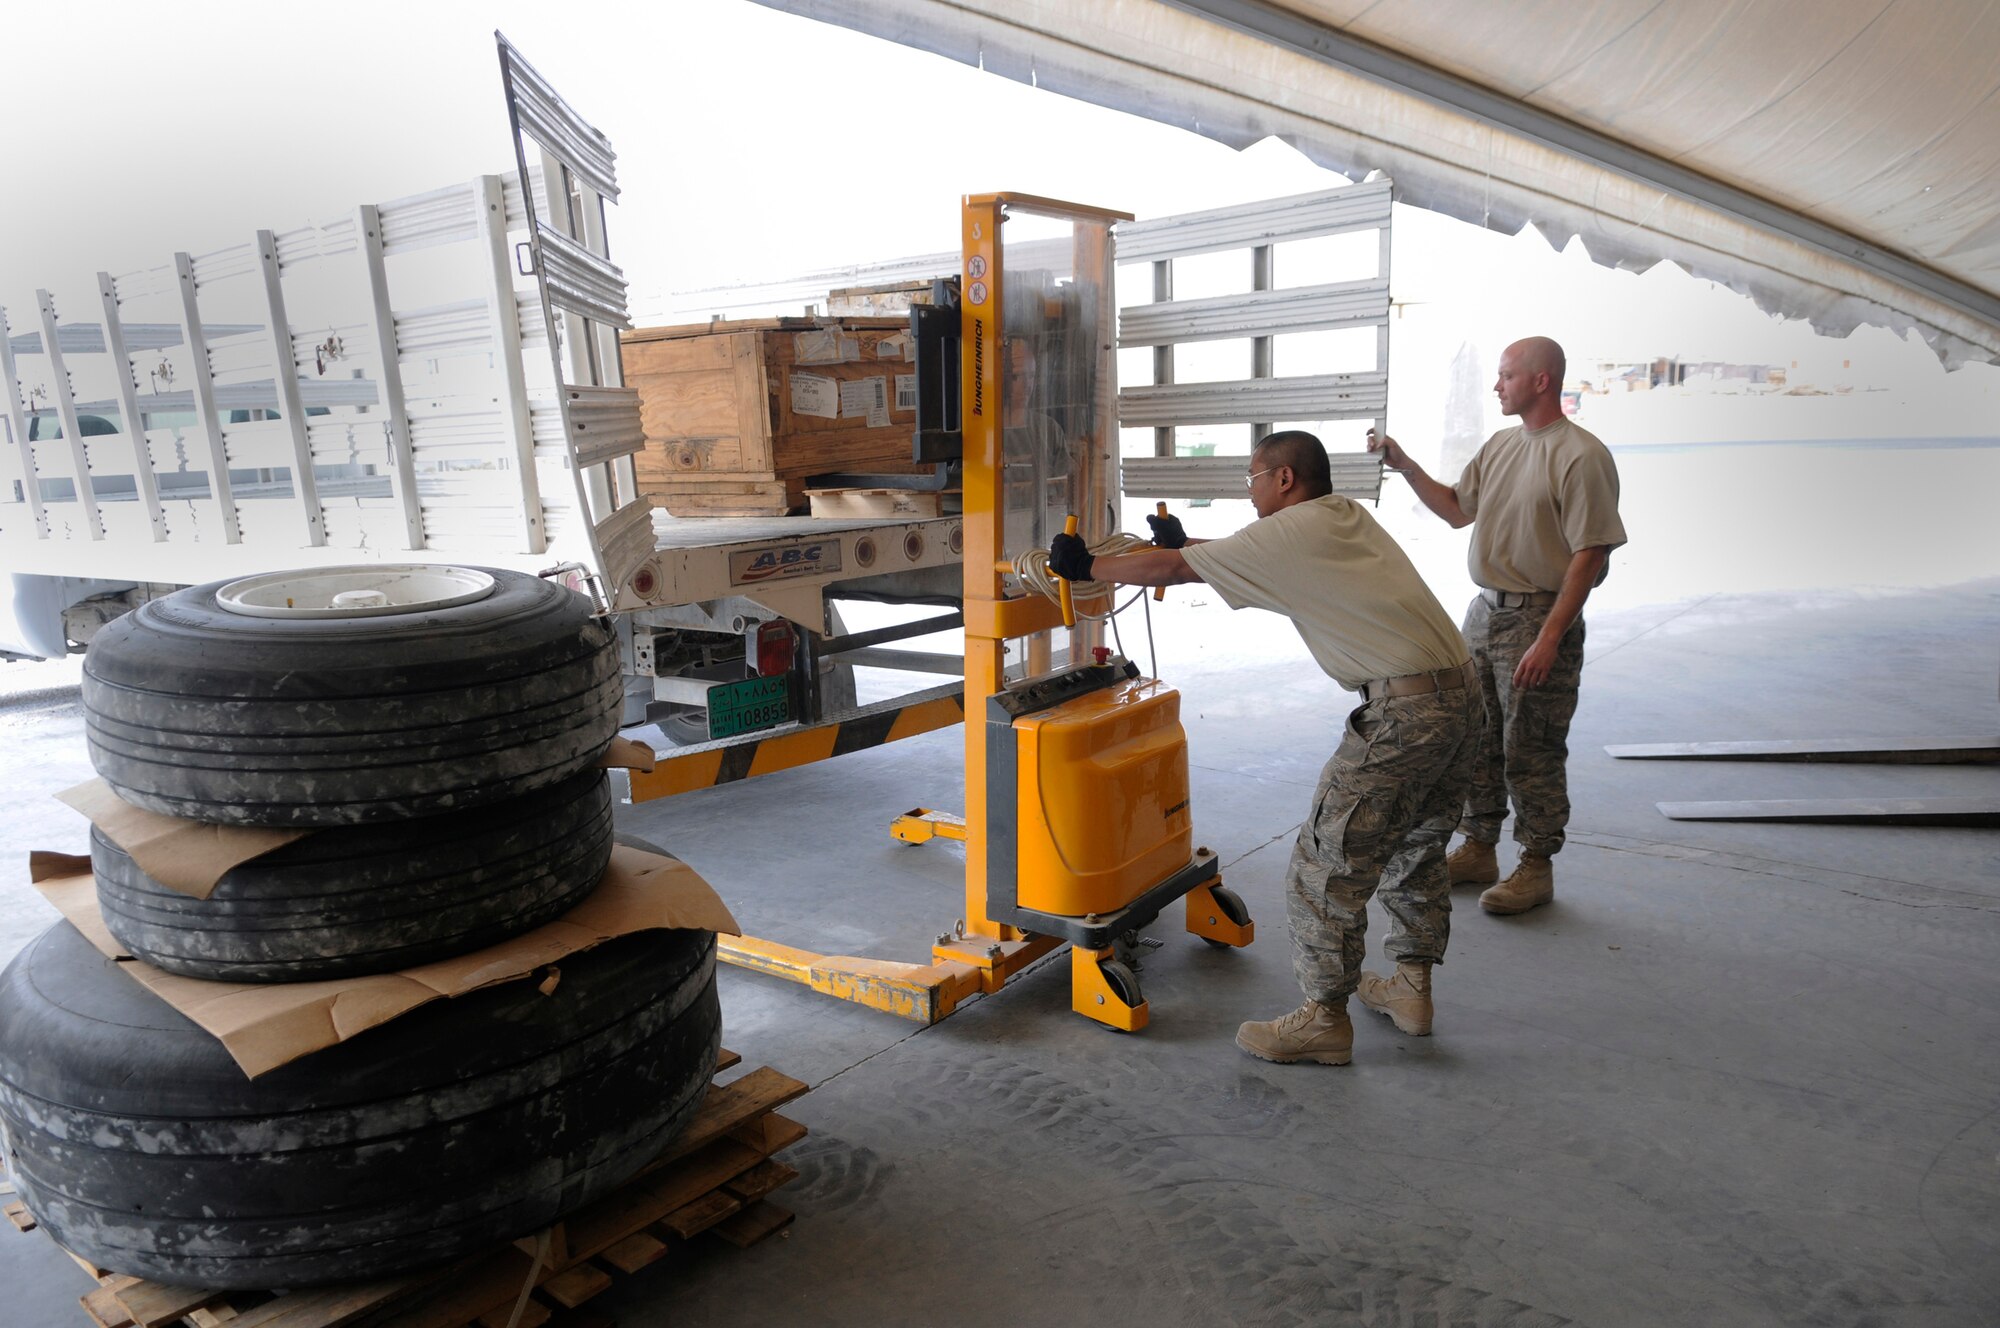 Staff Sgt. Daryl Reid, 379th Expeditionary Logistics Readiness Squadron, holds the tailgate open as Senior Airman Moises Maramba, 379 ELRS, loads a box onto a truck using a half-ton electric stacker, Nov. 6, at an undisclosed air base in Southwest Asia.  The box contains a pump assembly for a C-130 Hercules and is being transported to the 379th Expeditionary Aircraft Maintenance Squadron hydraulic maintenance shop, as a replacement part.  Sergeant Reid, a native of Phoenix, Ariz., is deployed from Mountain Home Air Force Base, Idaho.  Airman Maramba hails from the Bronx, N.Y., and is deployed from MacDill AFB, Fla.  Both are deployed in support of Operations Iraqi and Enduring Freedom and Joint Task Force-Horn of Africa.  (U.S. Air Force photo by Tech. Sgt. Michael Boquette/Released)